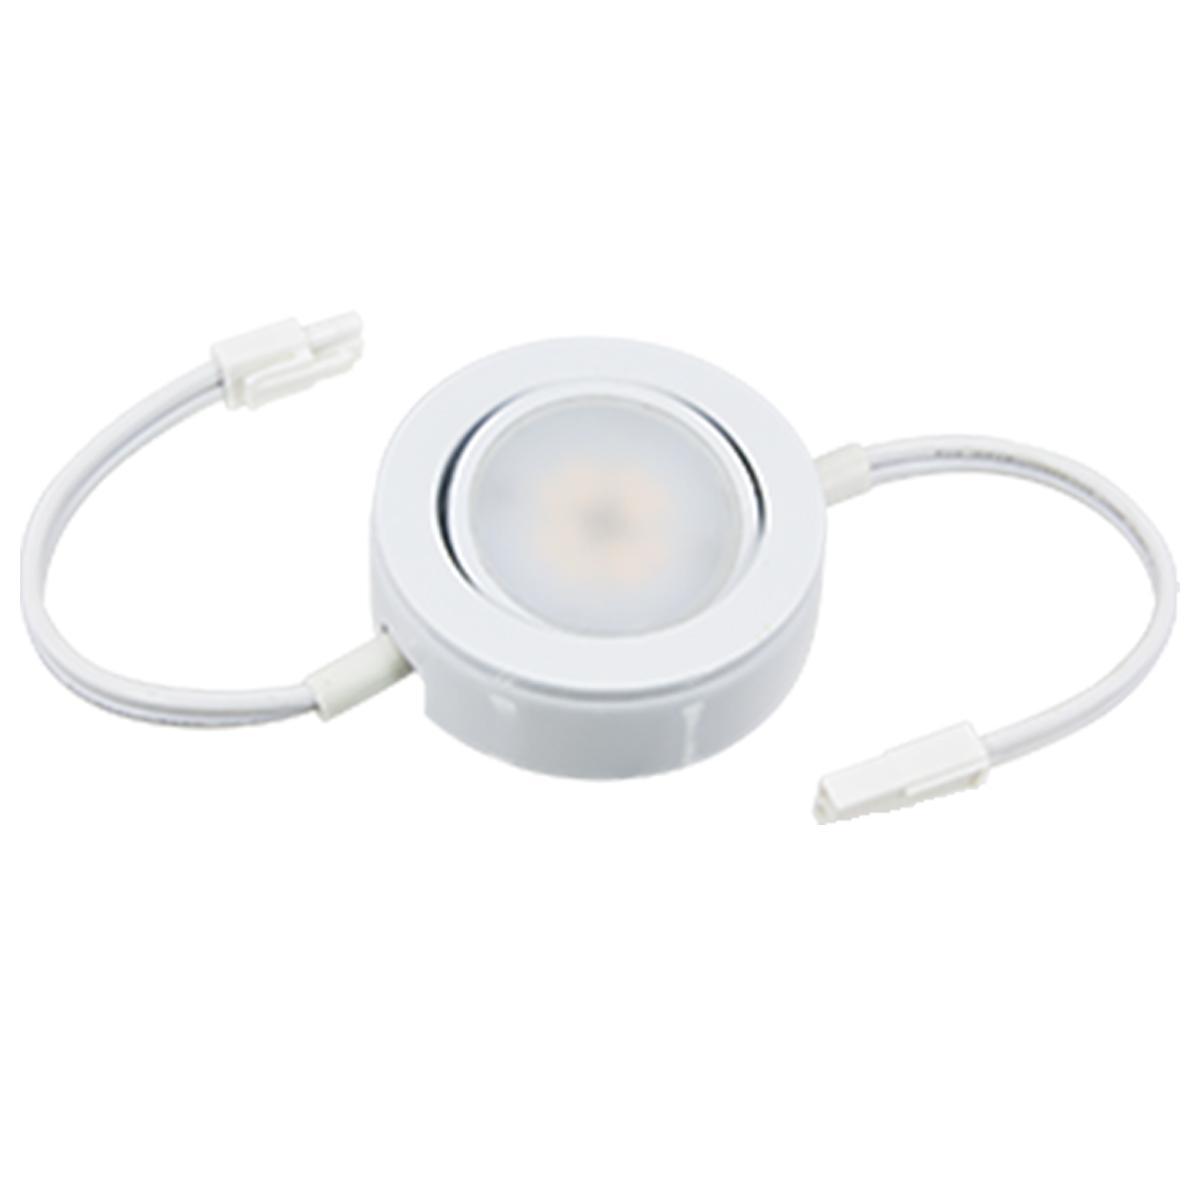 MVP LED Puck Light with Lead and Tail wires, 4.3 Watts, 2700K, 120V, White